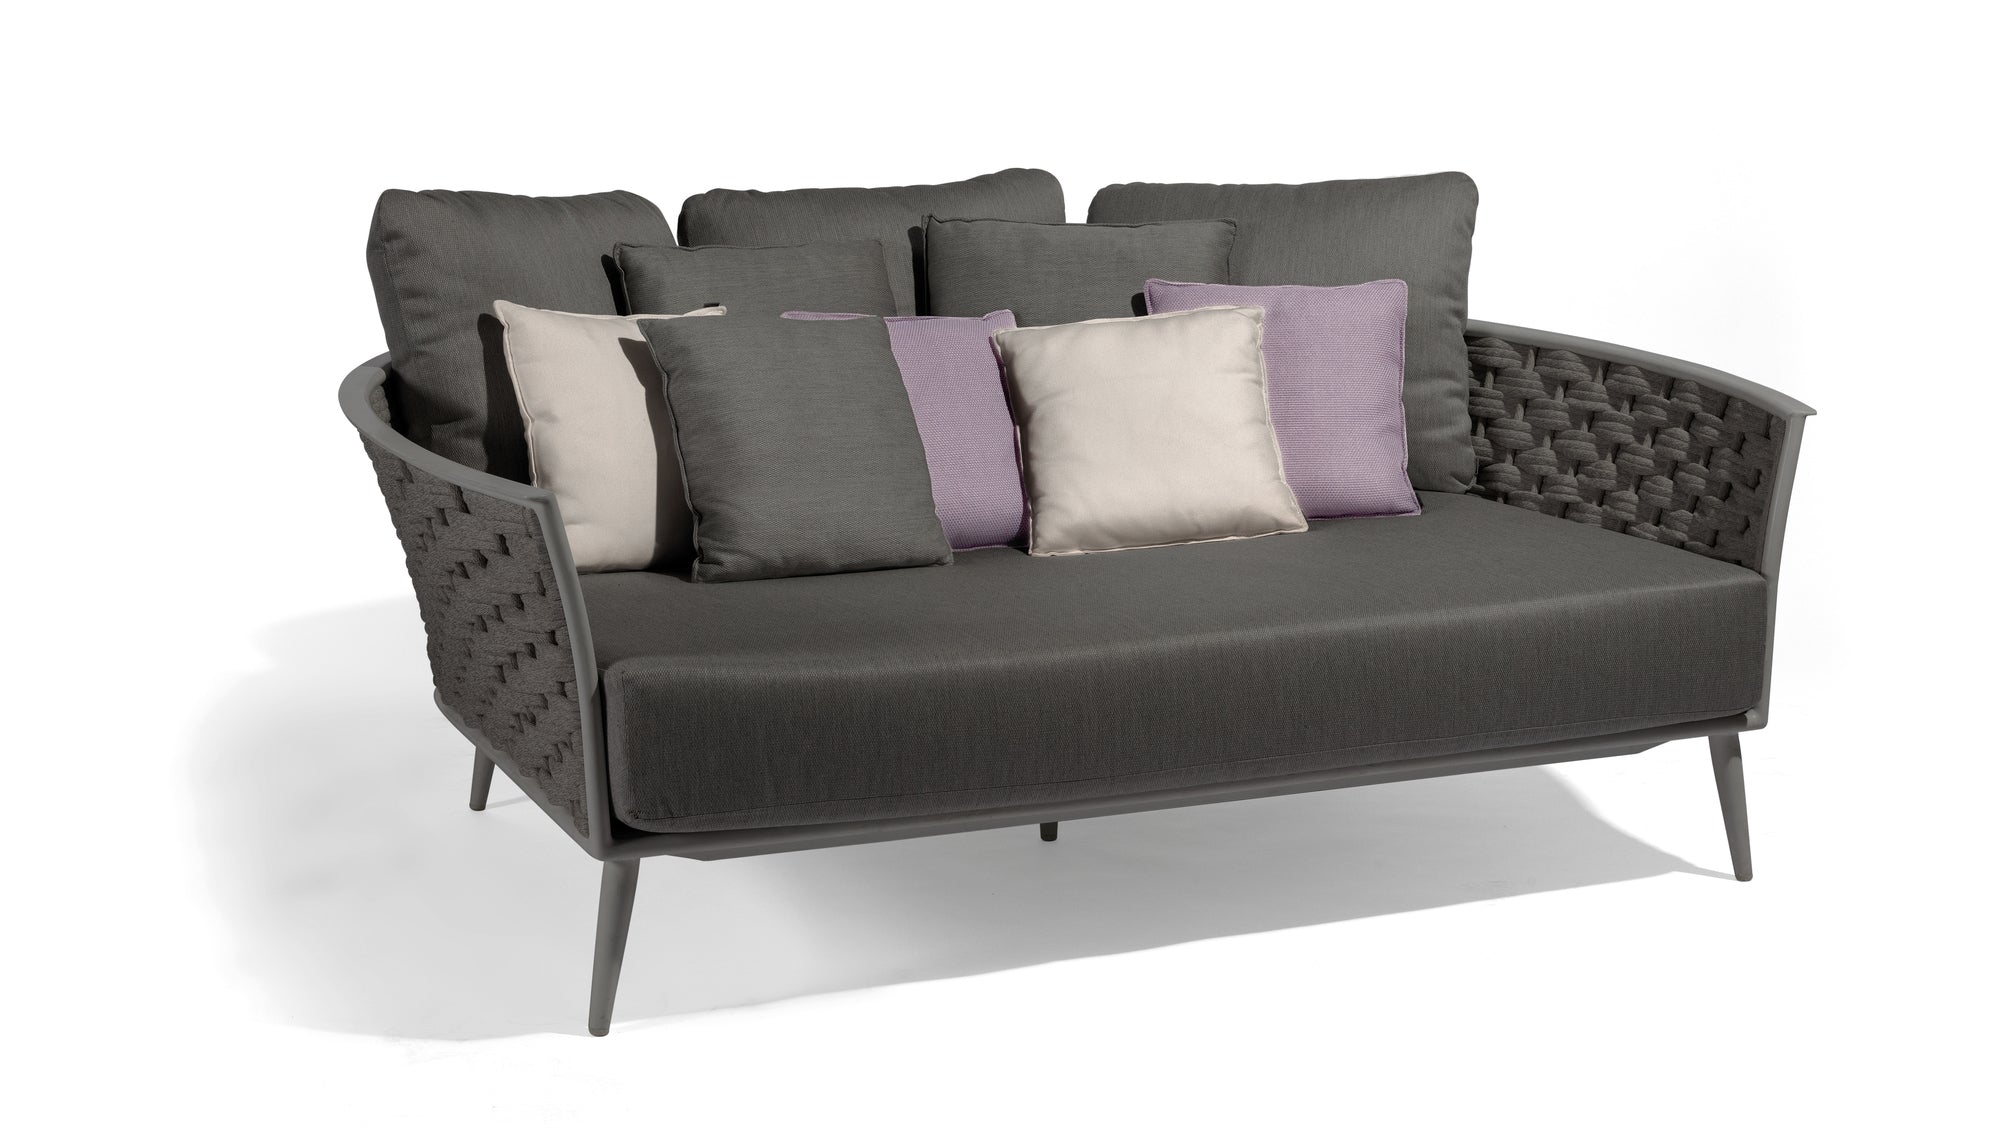 Manutti Cascade Daybed - Anthracite